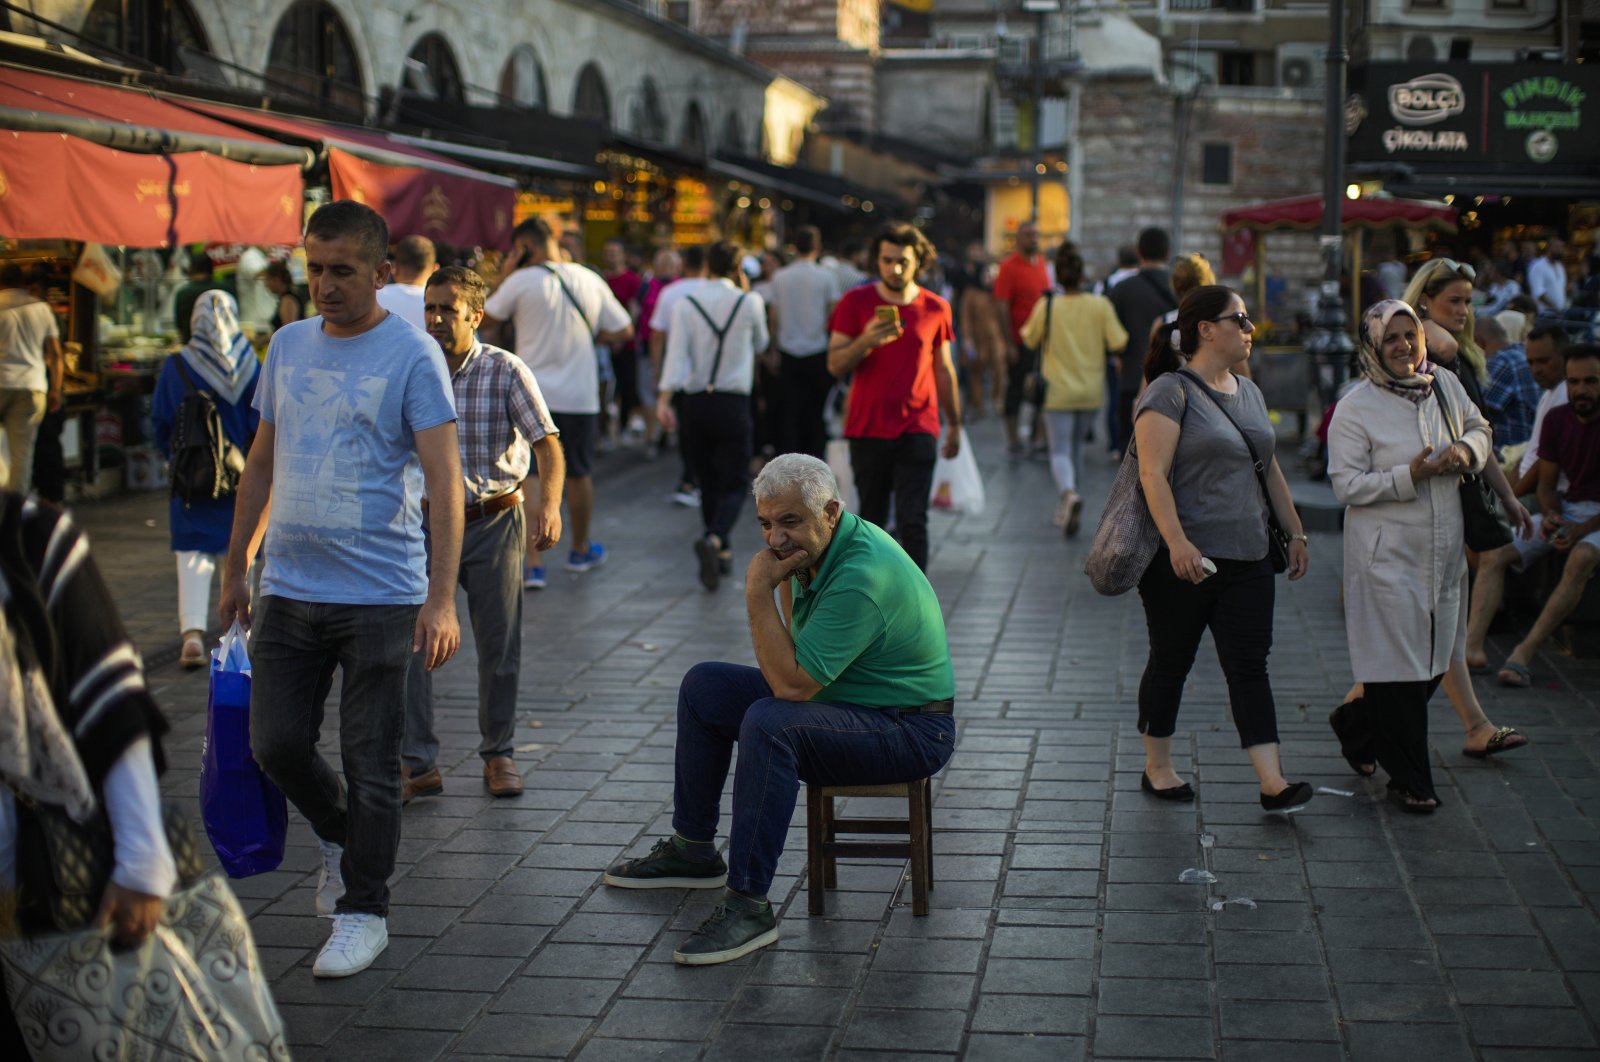 A man sits as people walk past by at the Spice Bazaar in Istanbul, Türkiye, Aug. 18, 2022. (AP Photo)